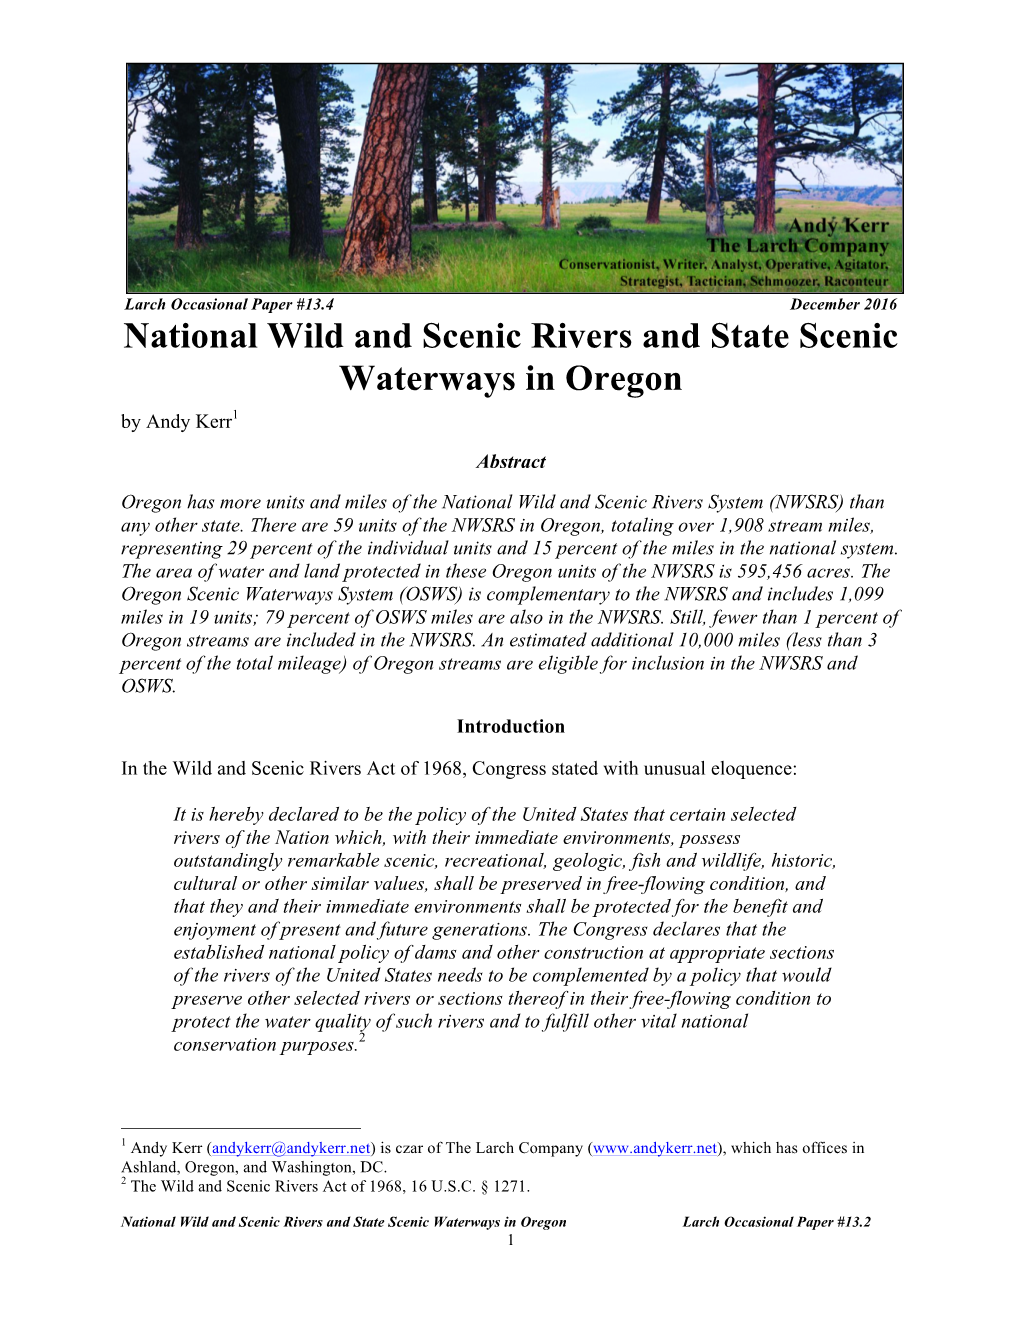 National Wild and Scenic Rivers and State Scenic Waterways in Oregon by Andy Kerr1